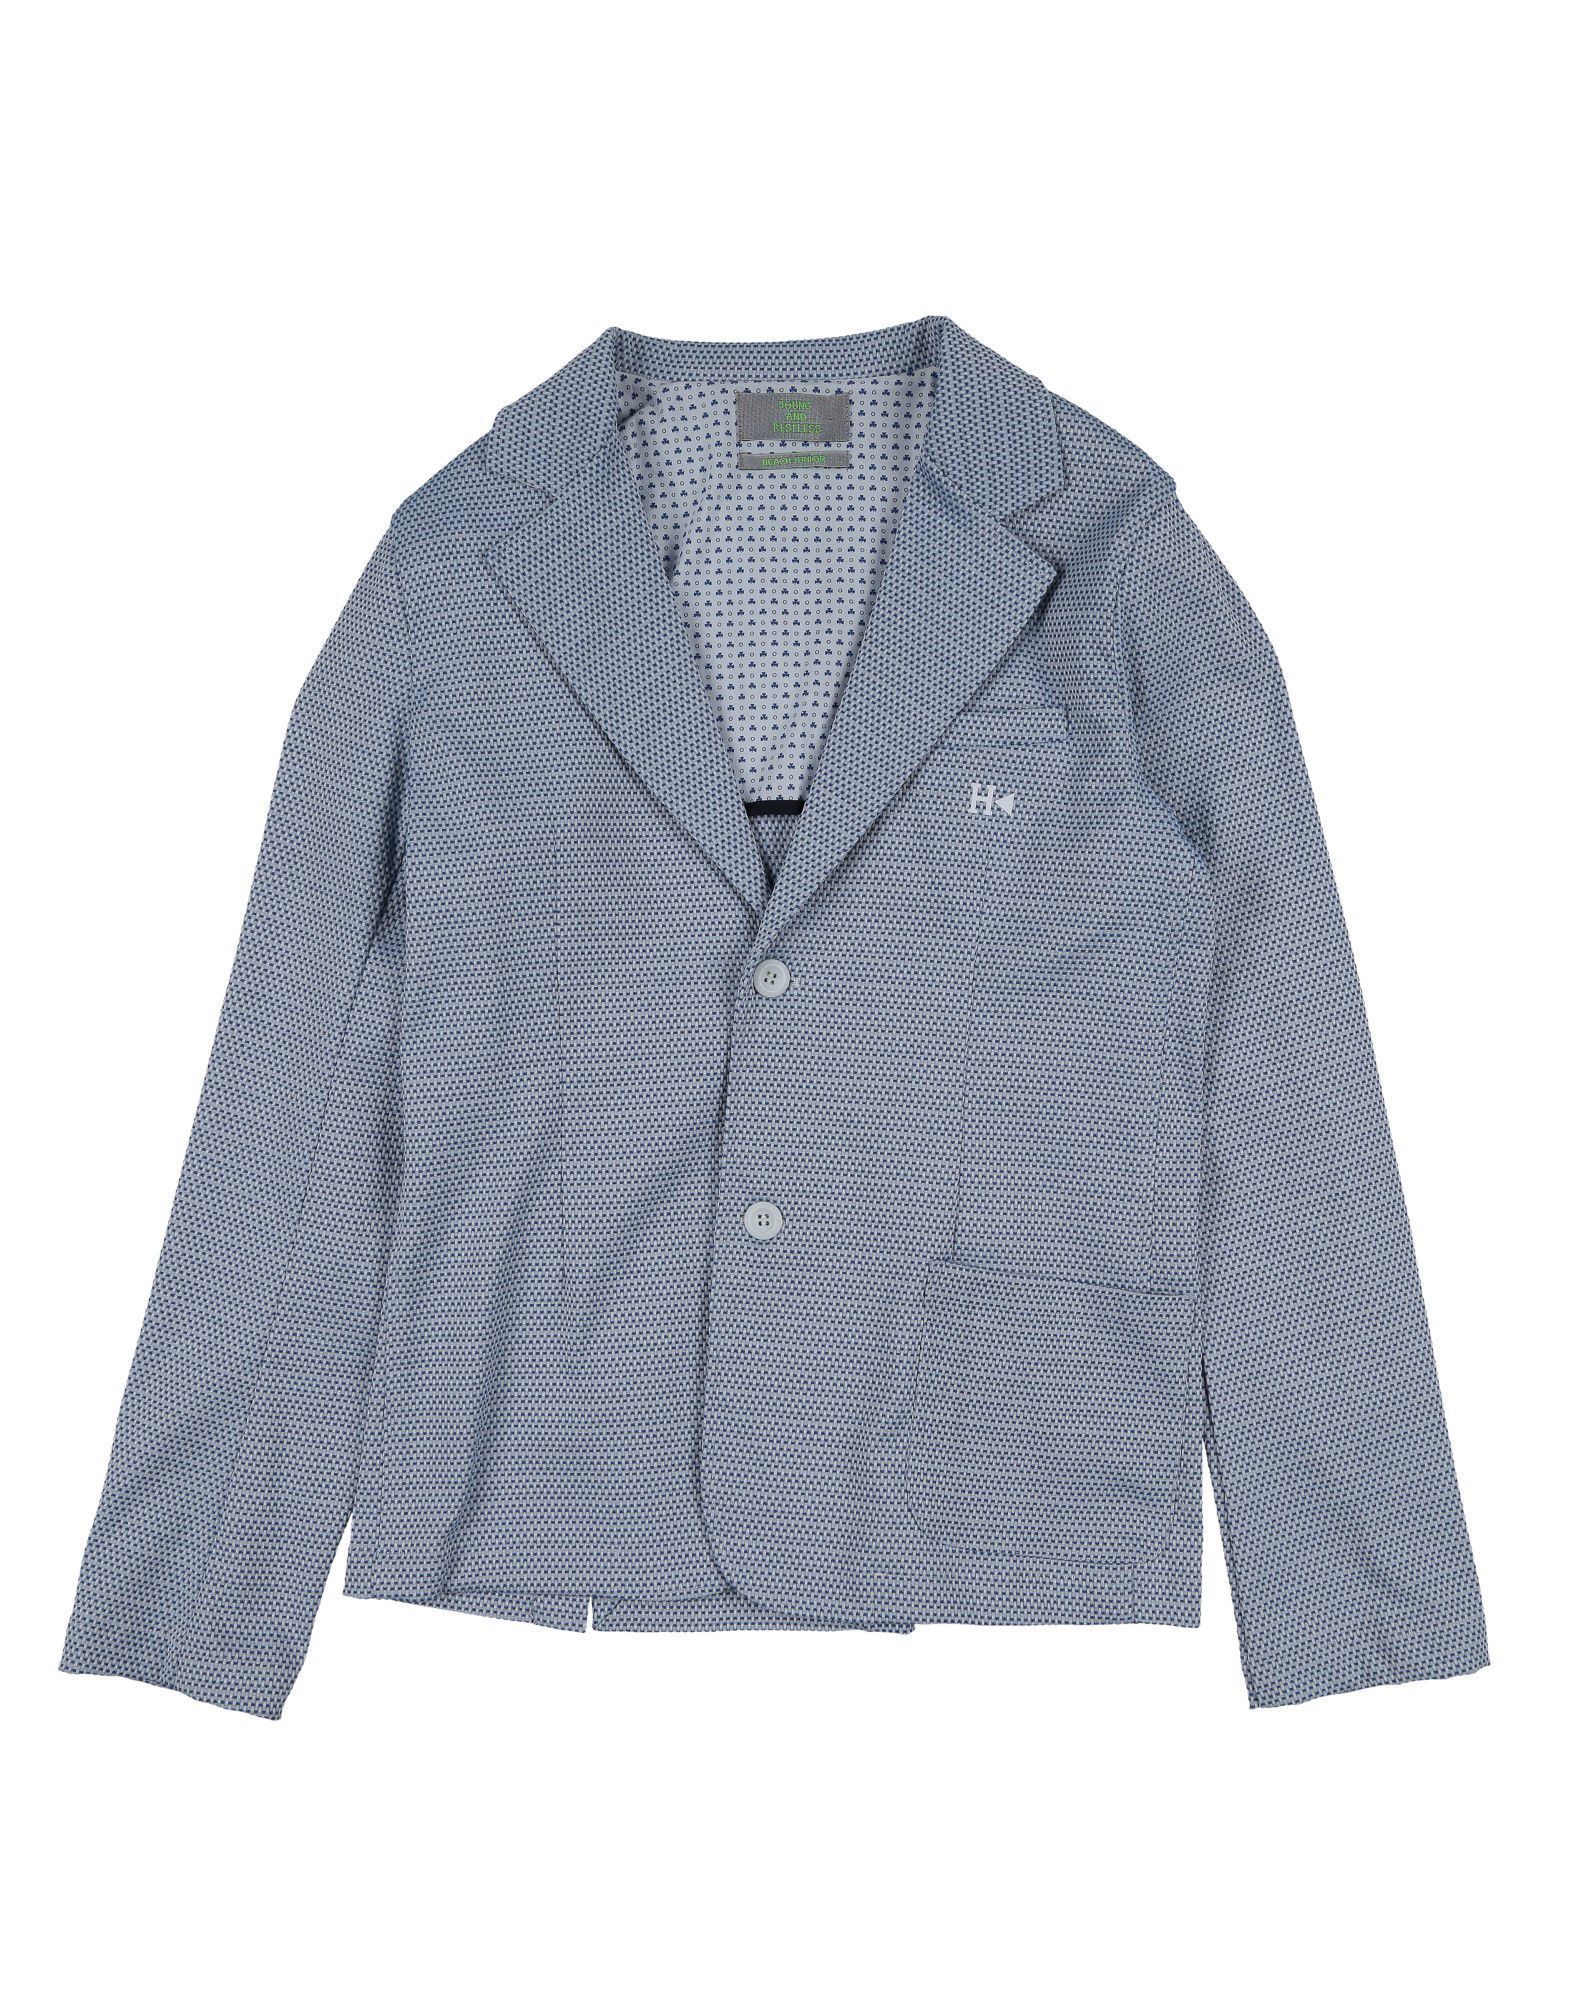 plain weave, no appliqu�s, two-tone, multipockets, single chest pocket, button closing, lapel collar, single-breasted , long sleeves, unlined, back split, wash at 30� c, dry cleanable, iron at 110� c max, do not bleach, do not tumble dry, stretch, single-breasted jacket